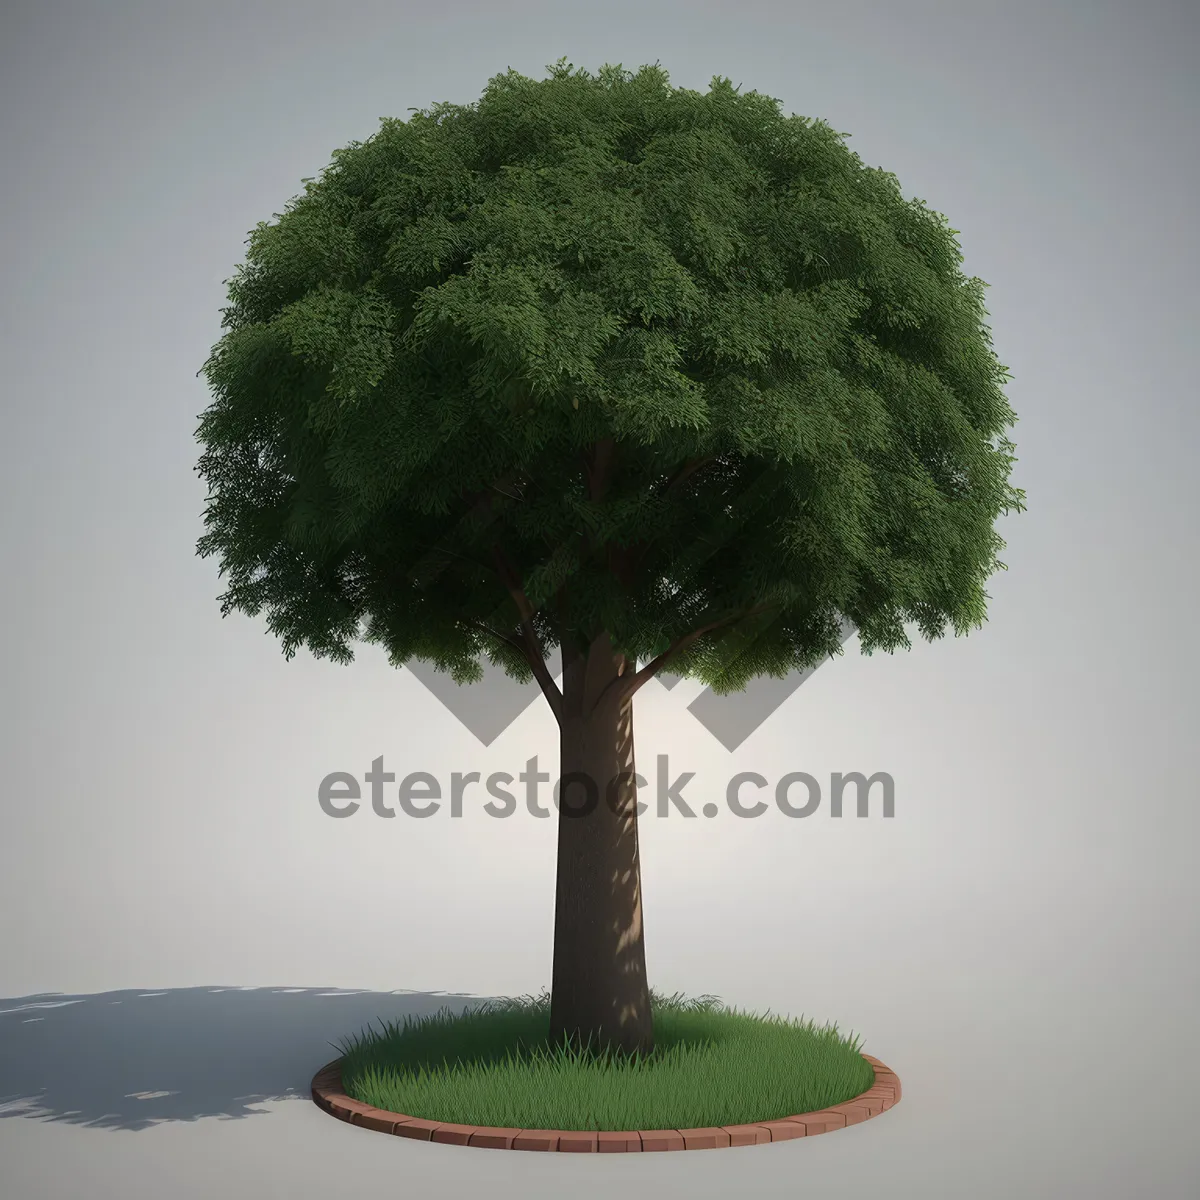 Picture of Miniature Bonsai Tree: Summer Growth in Natural Environment